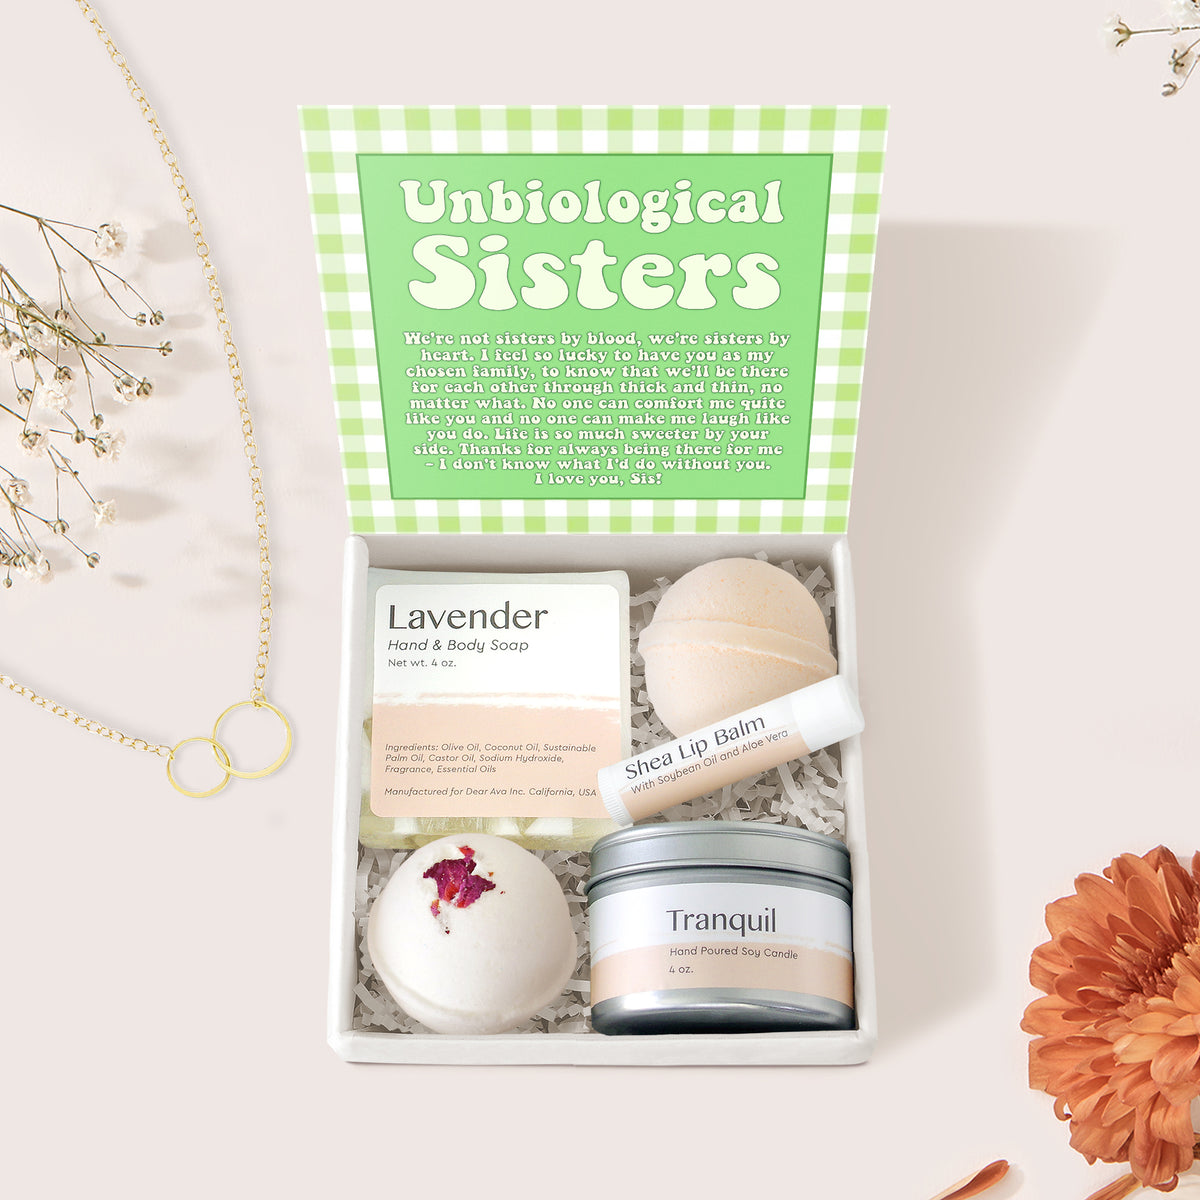 Unbiological Sisters Double Circle Necklace Spa Gift Box Set